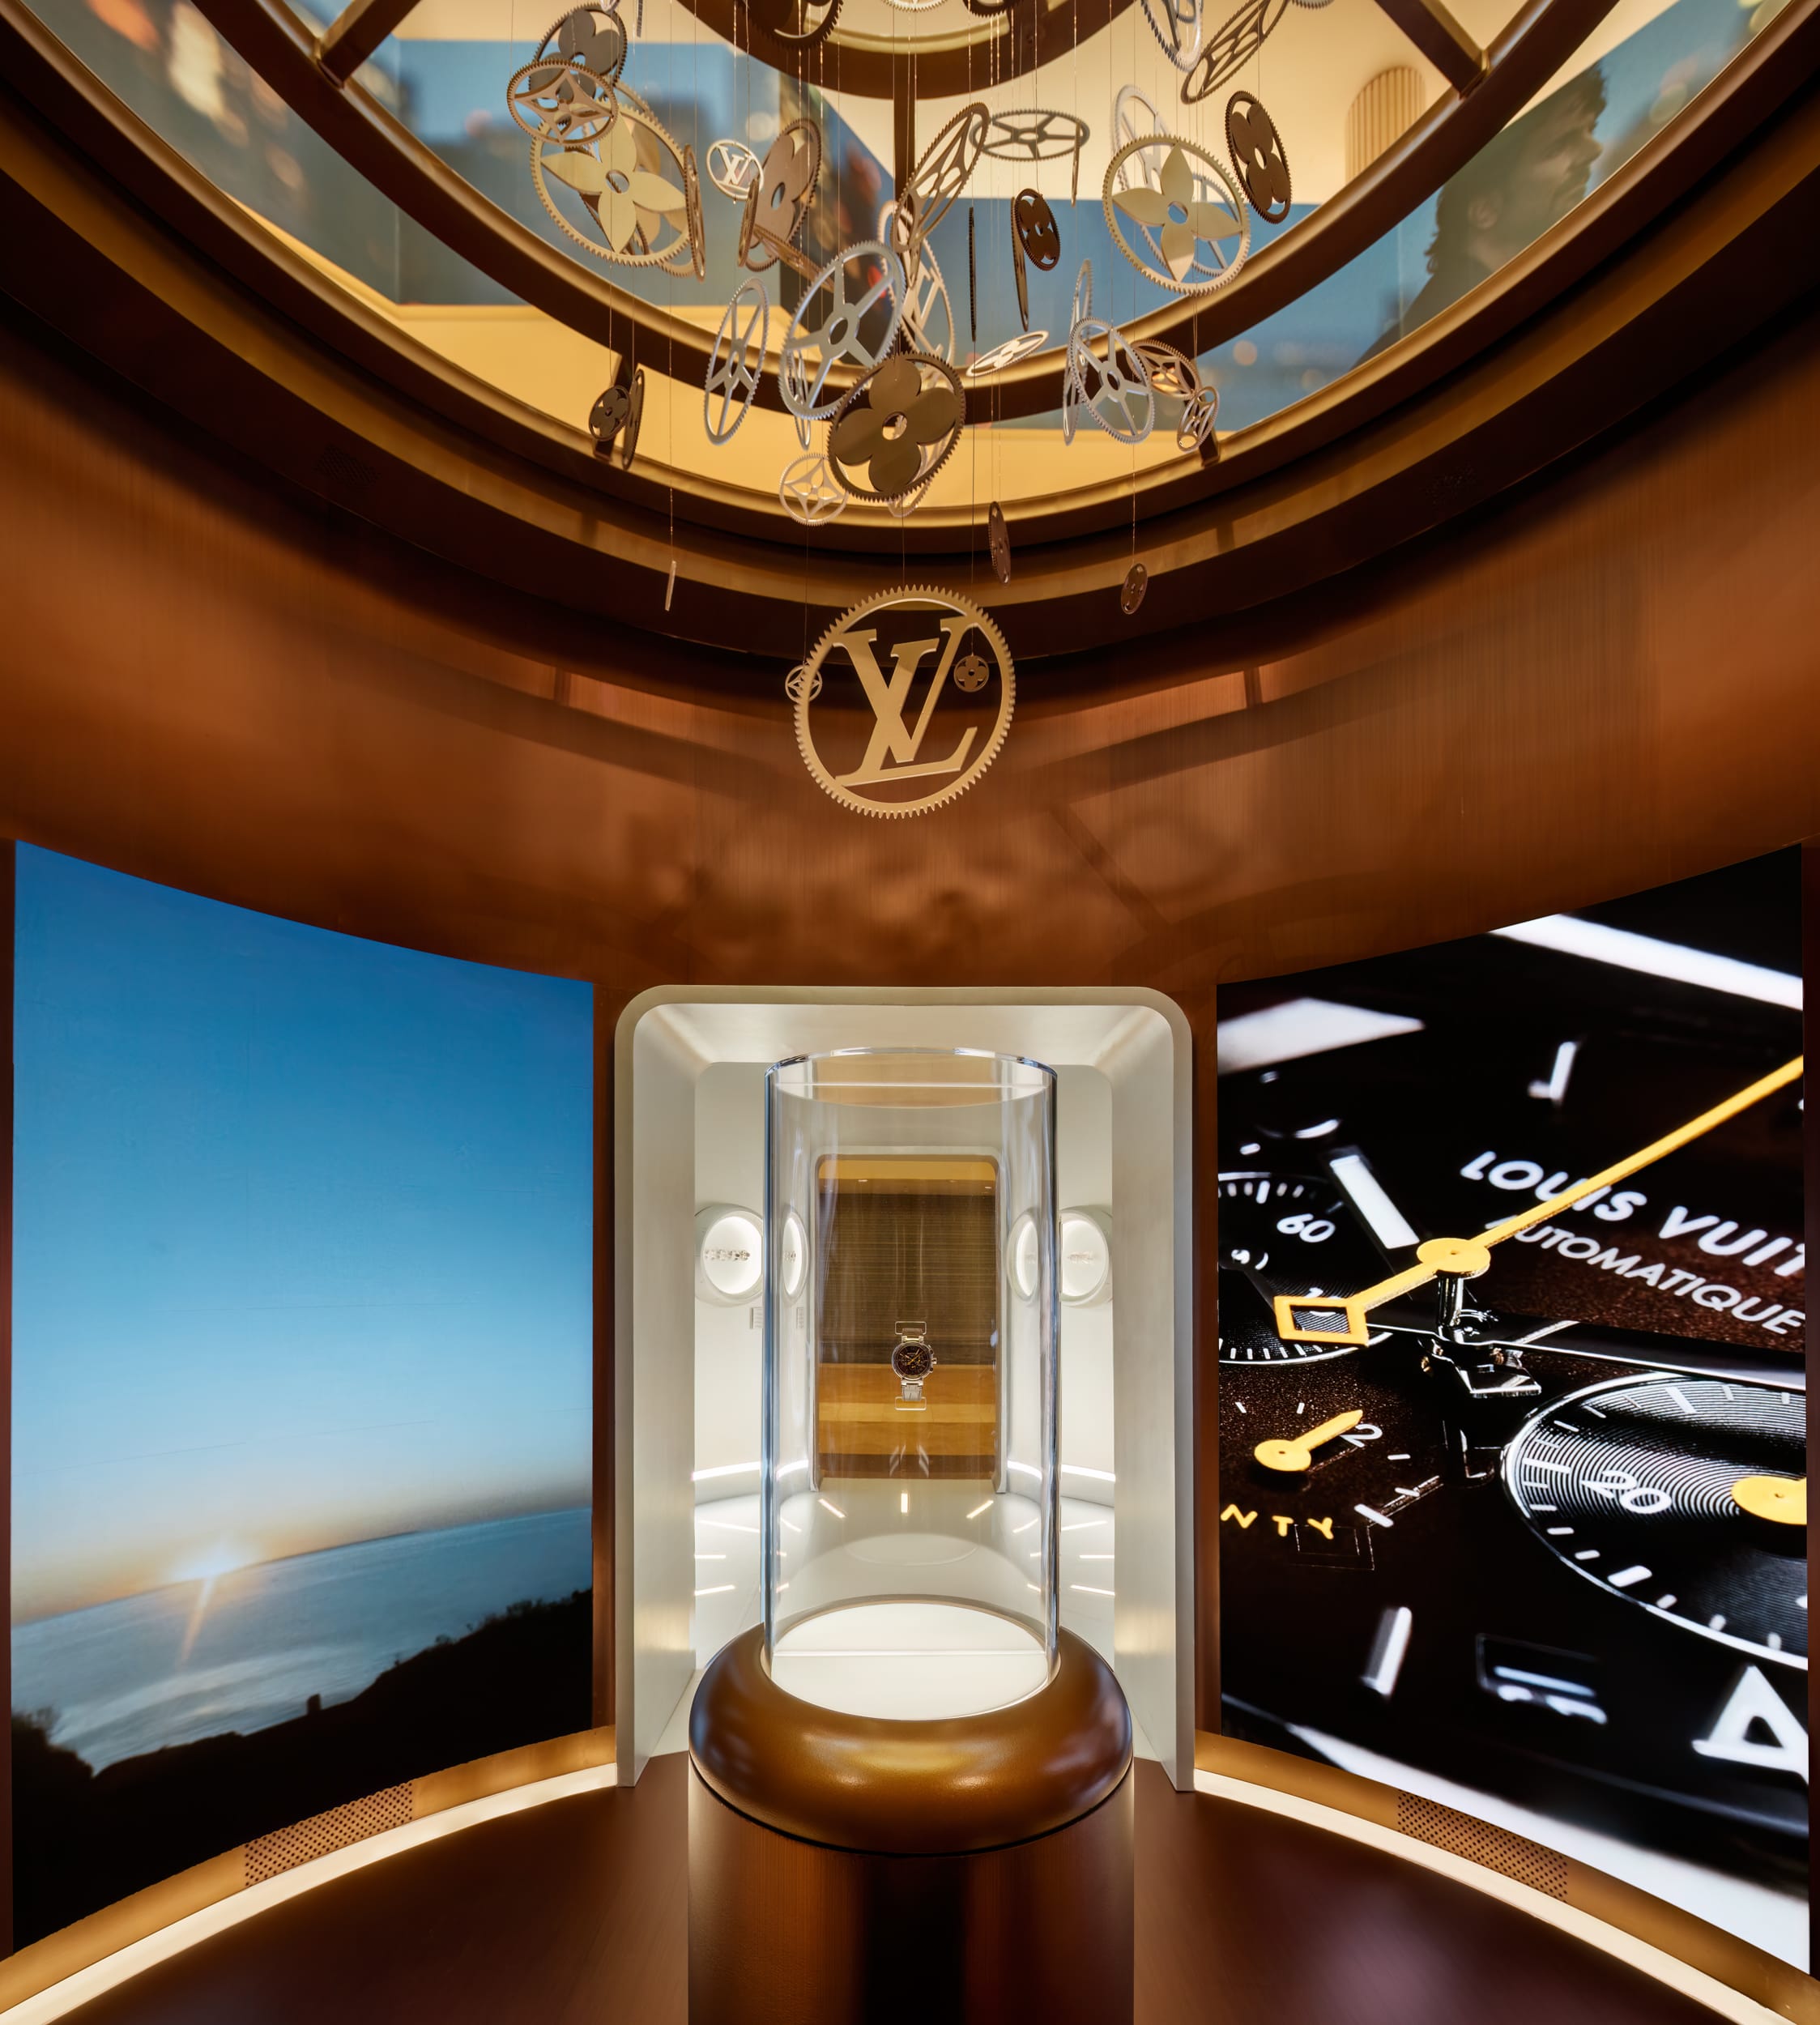 Louis Vuitton Unveils an Exhibition for the Tambour's 20th